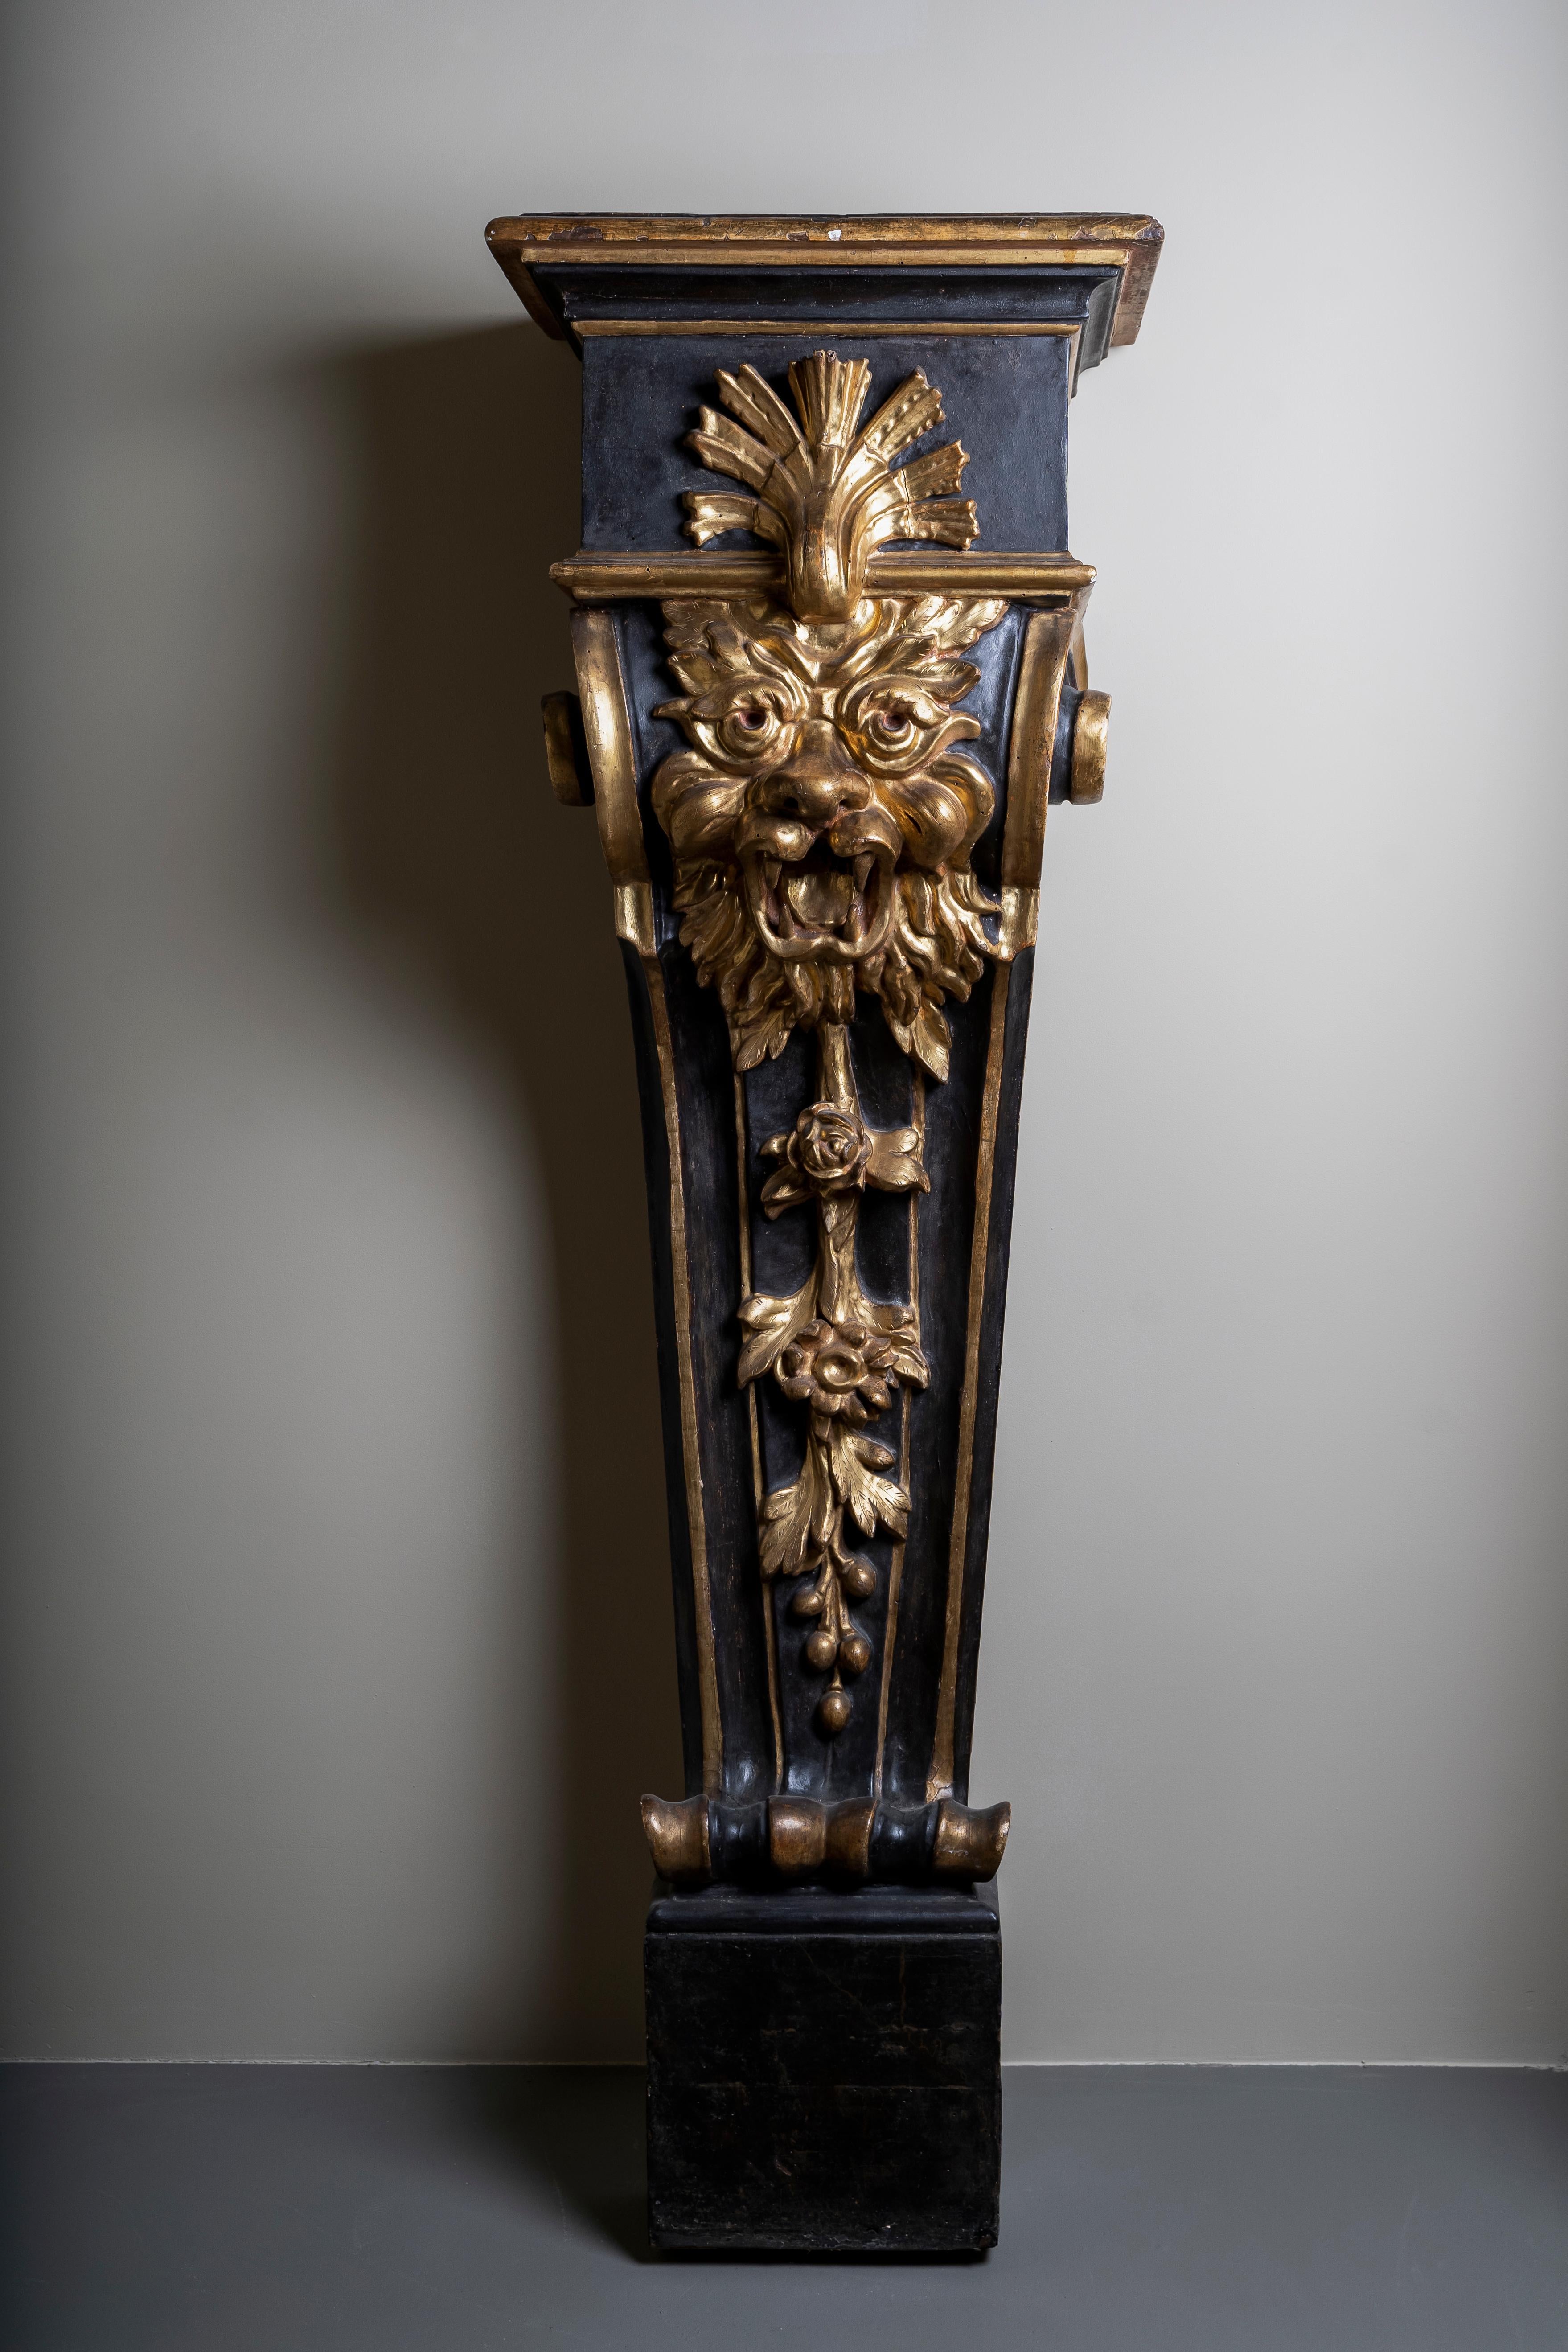 Rare pair of pedestals decorated with grotesques
Carved and partially gilded wood
Florence, early 17th century
159 x 48 x 34 cm

Pedestals comparable in style and size are exposed in the Museo degli Argenti in Palazzo Pitti (inventory number: